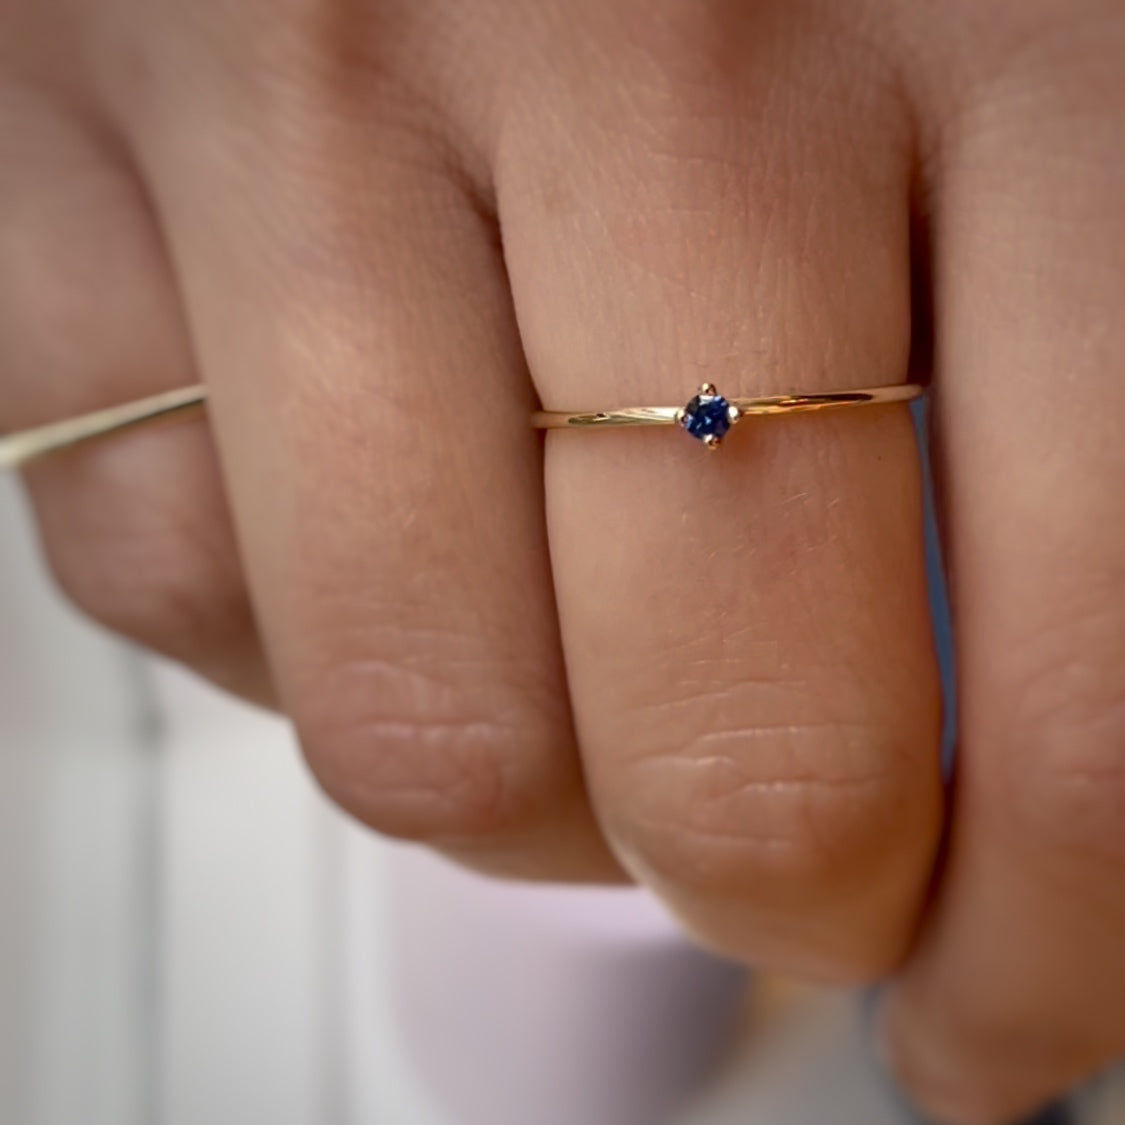 Tiny Pointy Ring - Blue sapphire